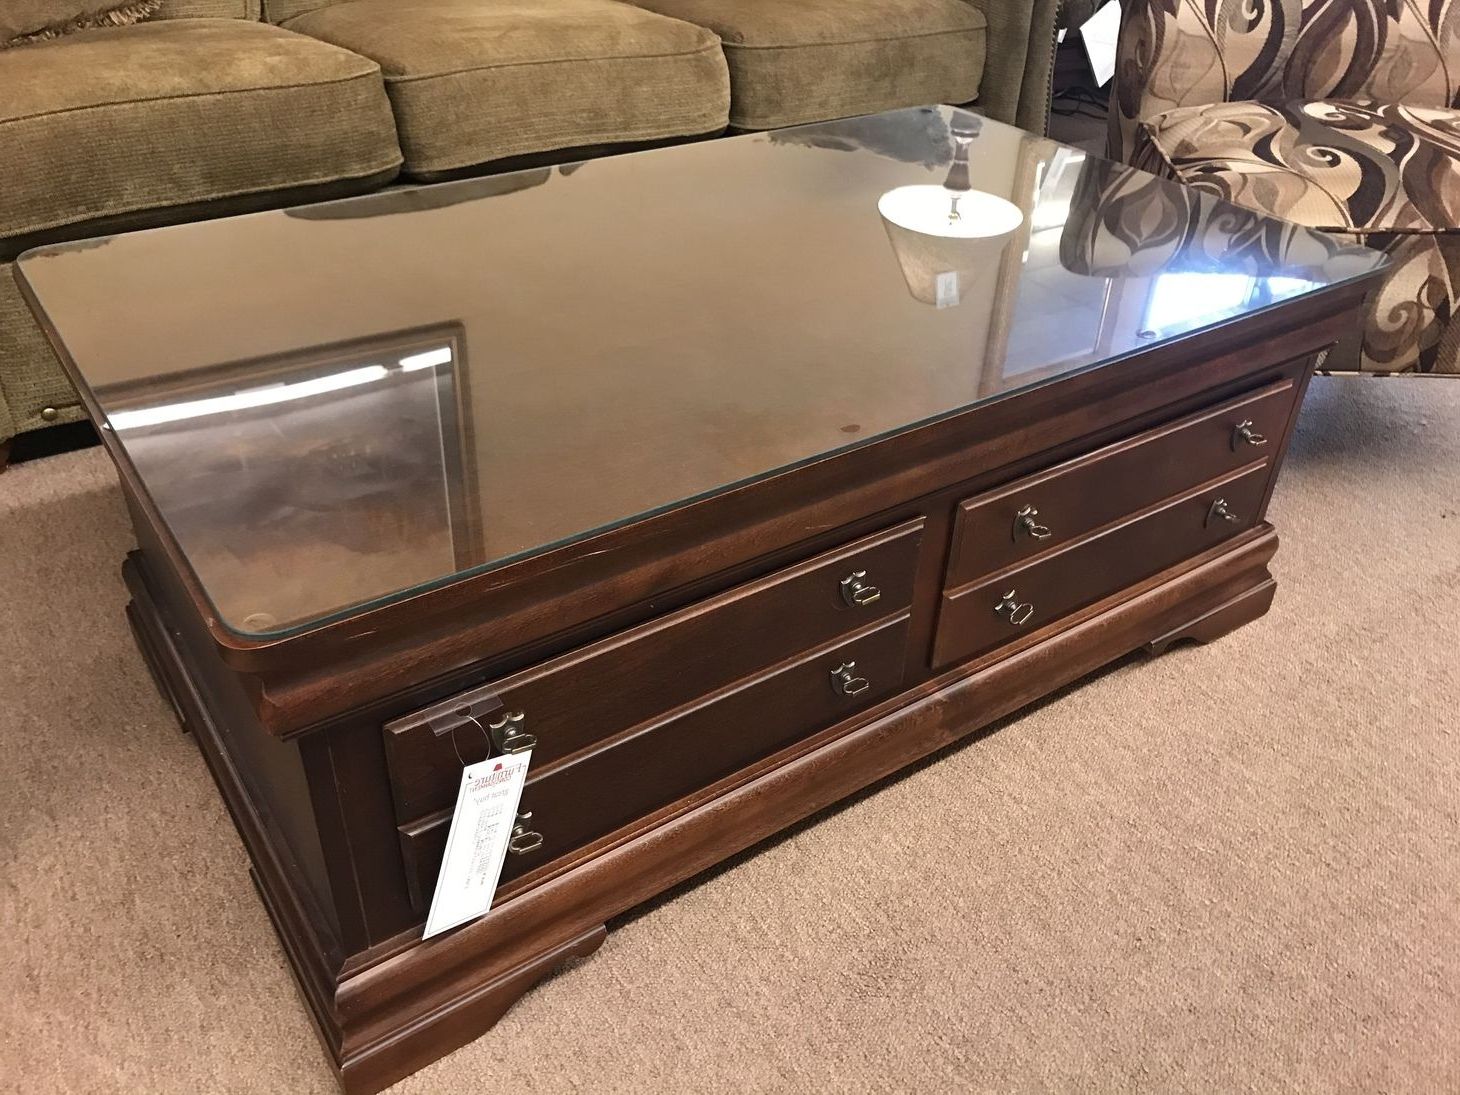 Delmarva With Regard To Well Liked 3 Piece Shelf Coffee Tables (Gallery 20 of 20)